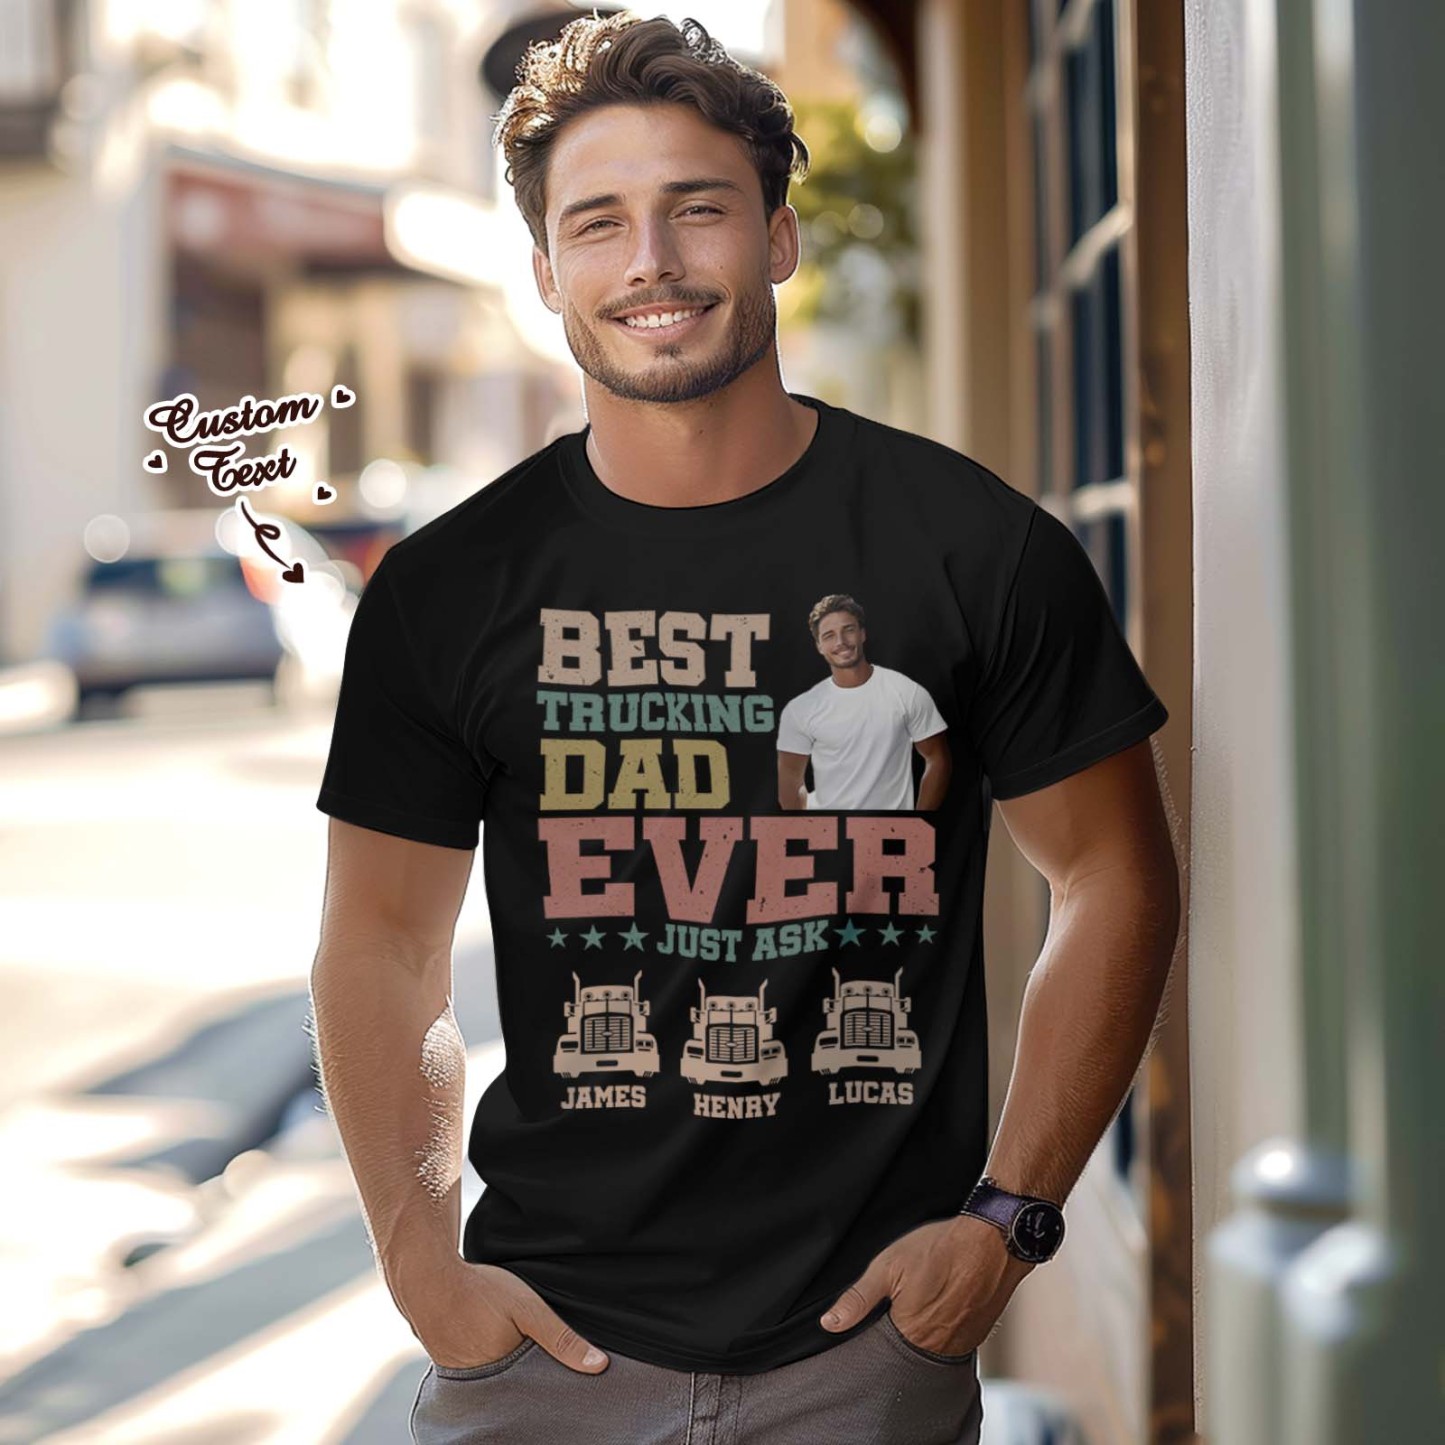 Custom Photo Text T-Shirt Personalized T-Shirt With Best Dad Ever Father's Day Gift - MyPhotoSocksAu